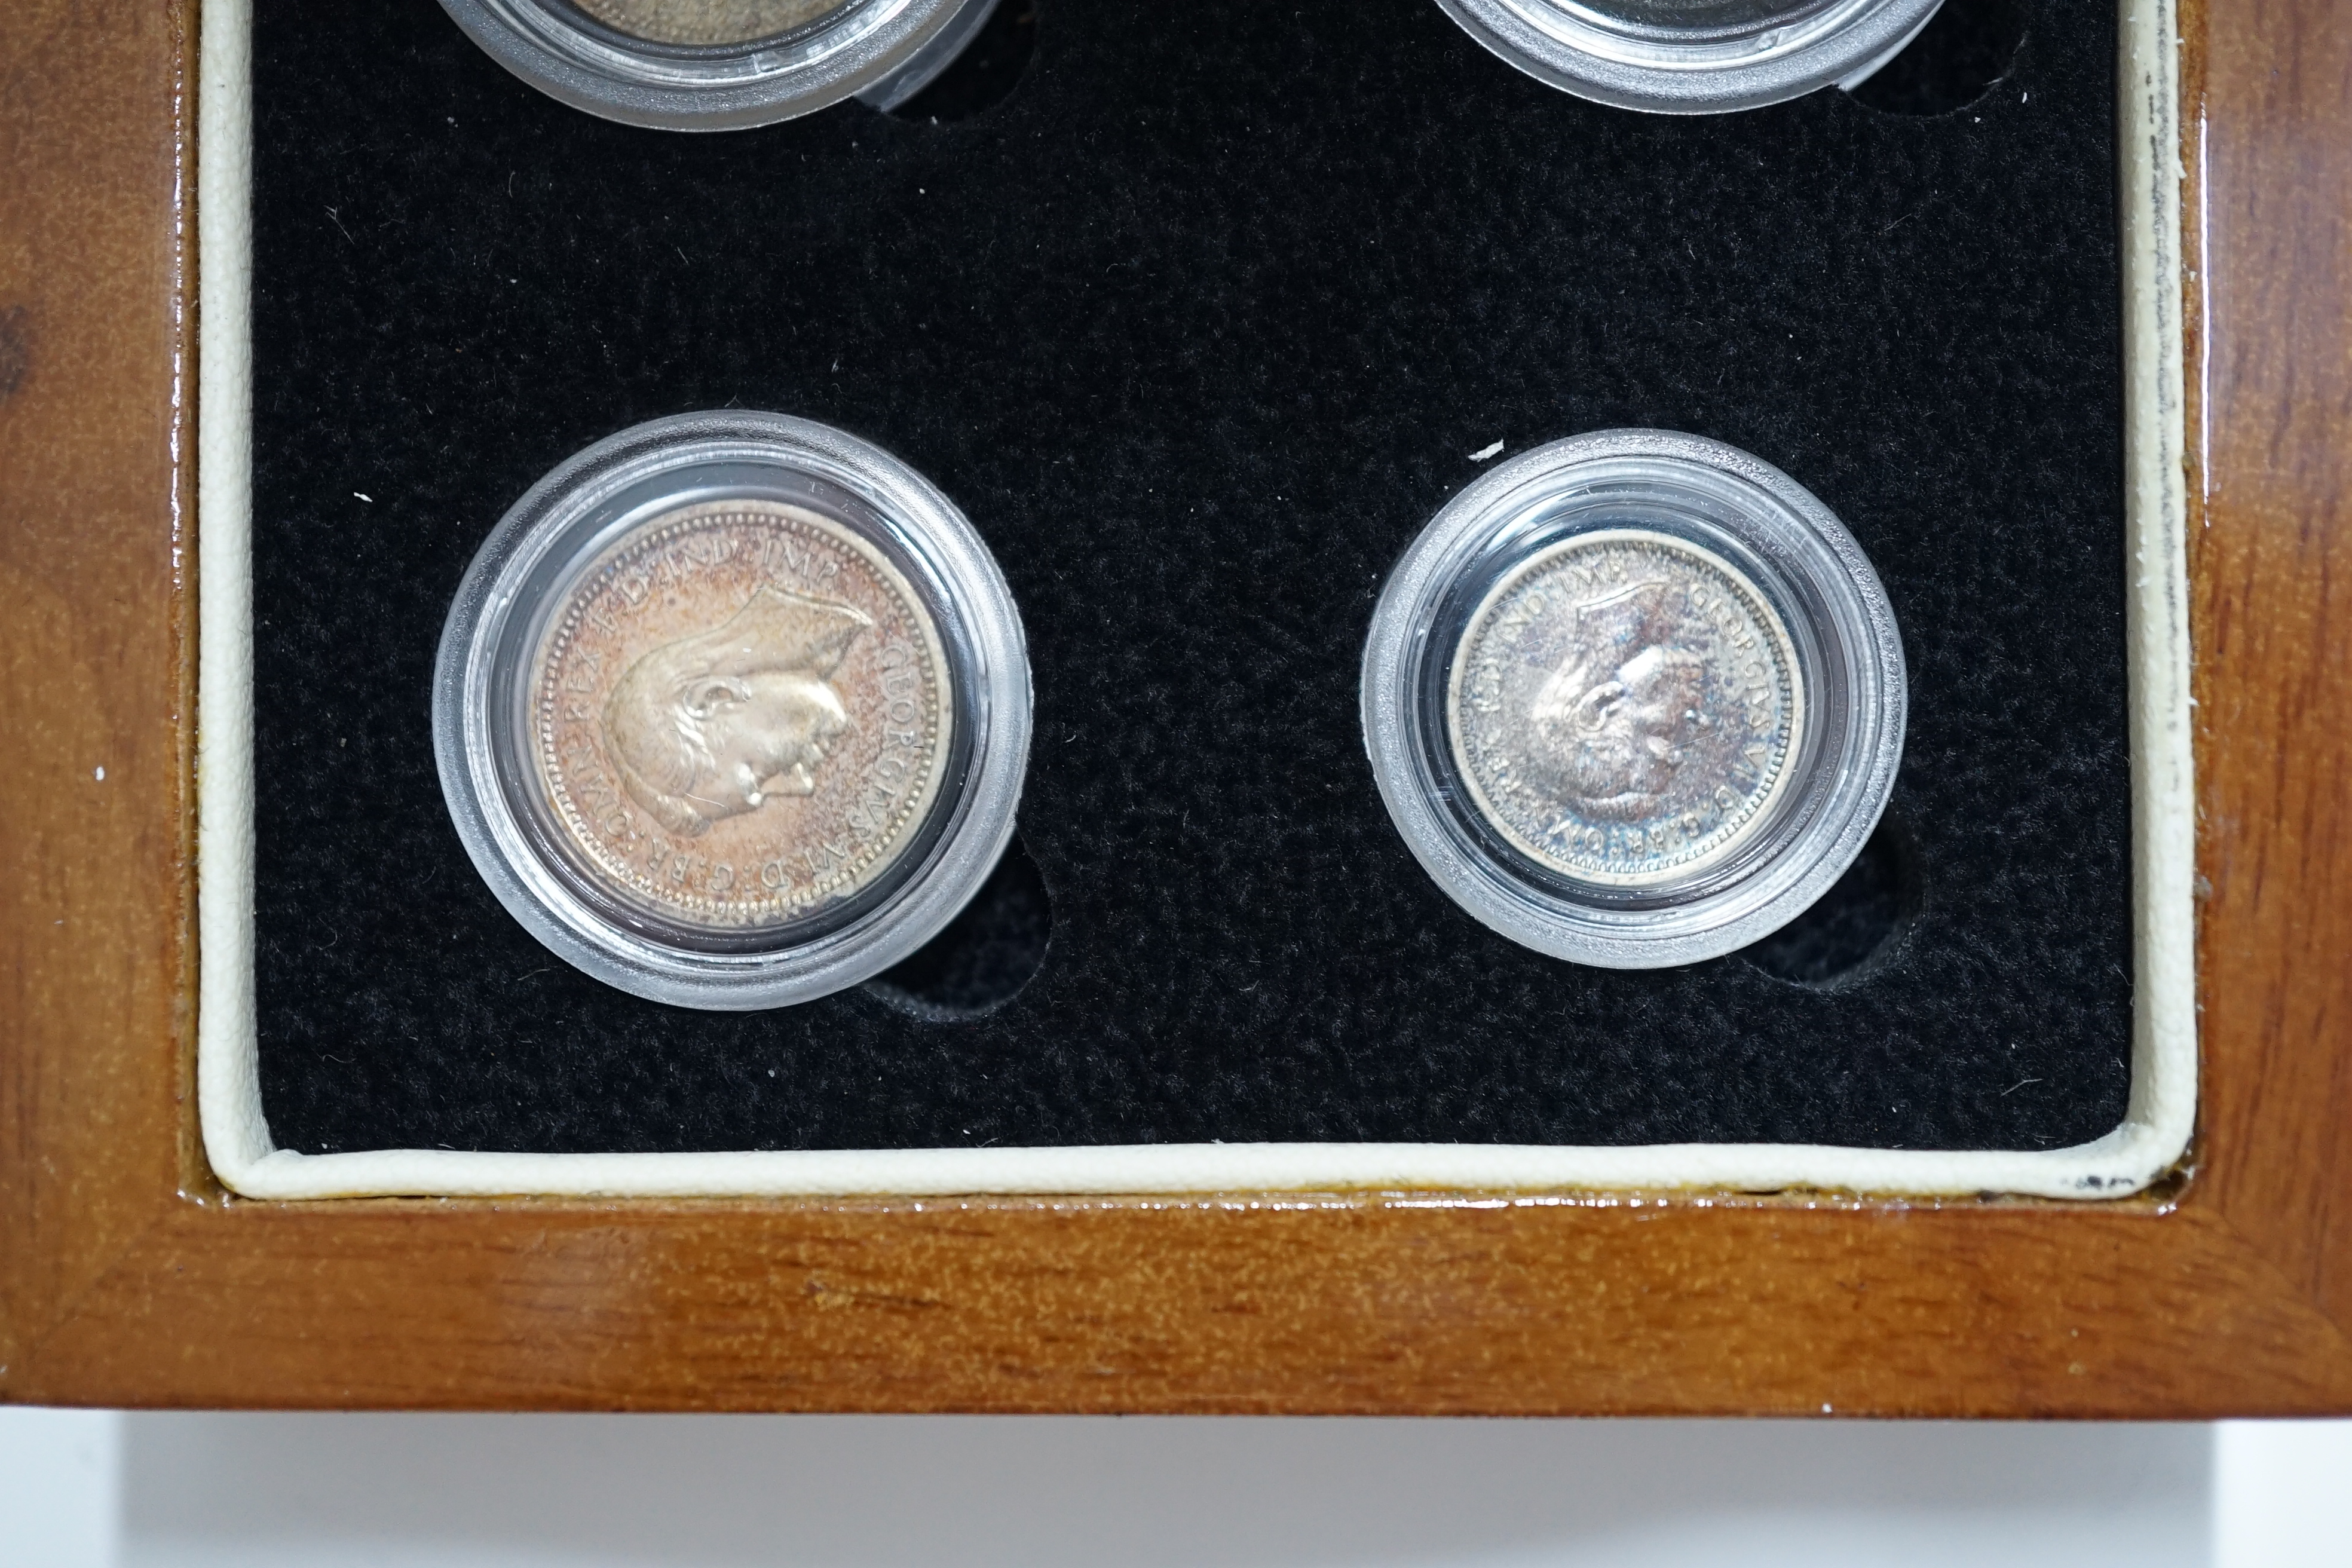 British silver coins, George VI four coin set of Maundy coins, 1939, toned UNC, in London mint case